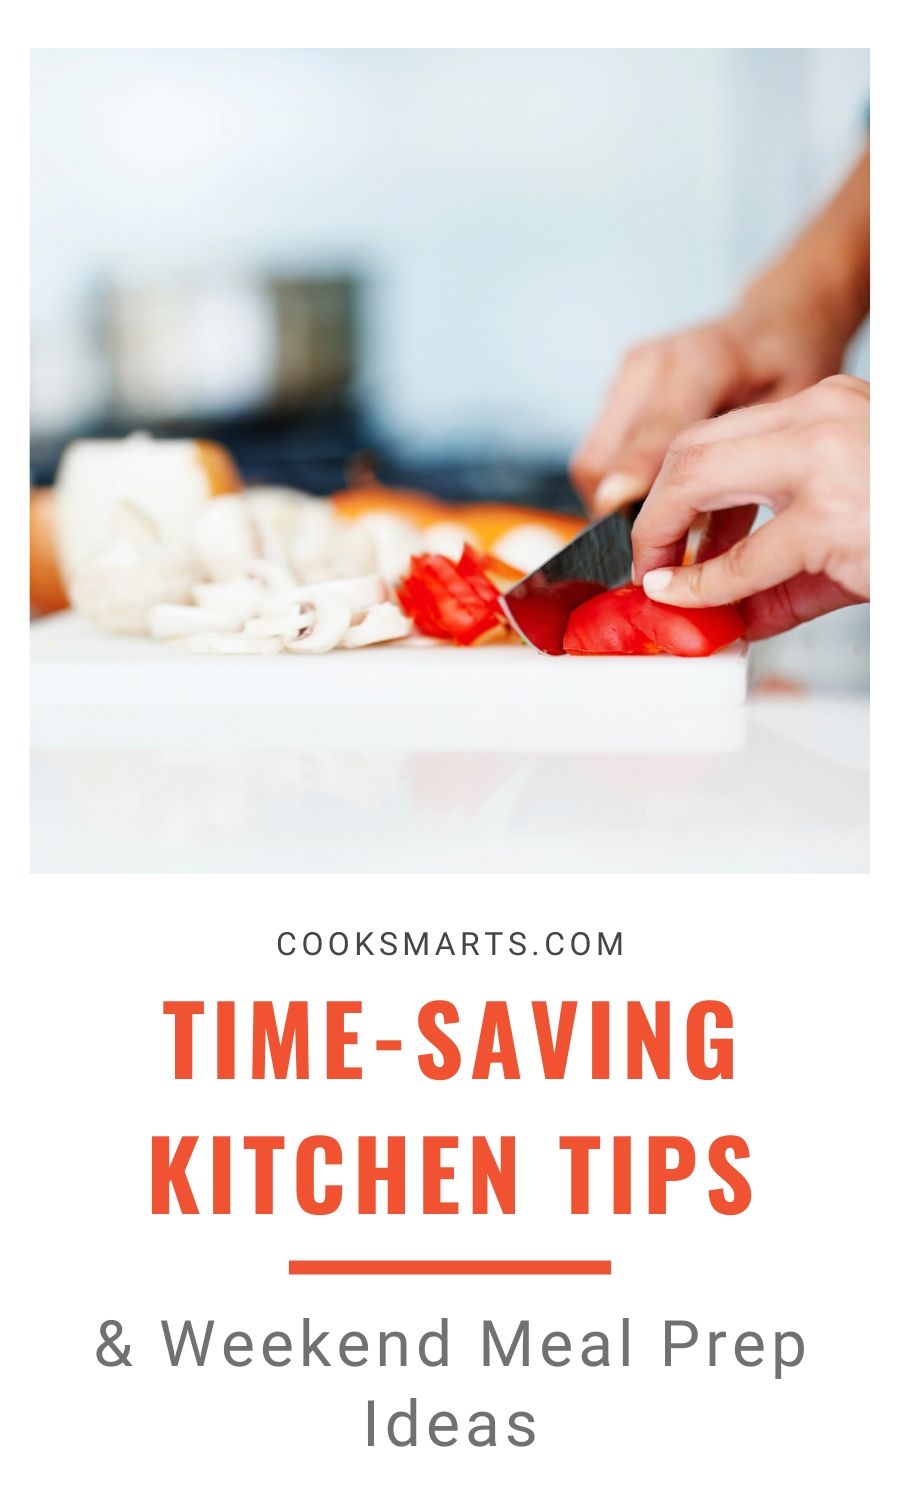 Rachel: Weekend Meal Prep & Other Time-Savers in the Kitchen | Cook Smarts Kitchen Hero